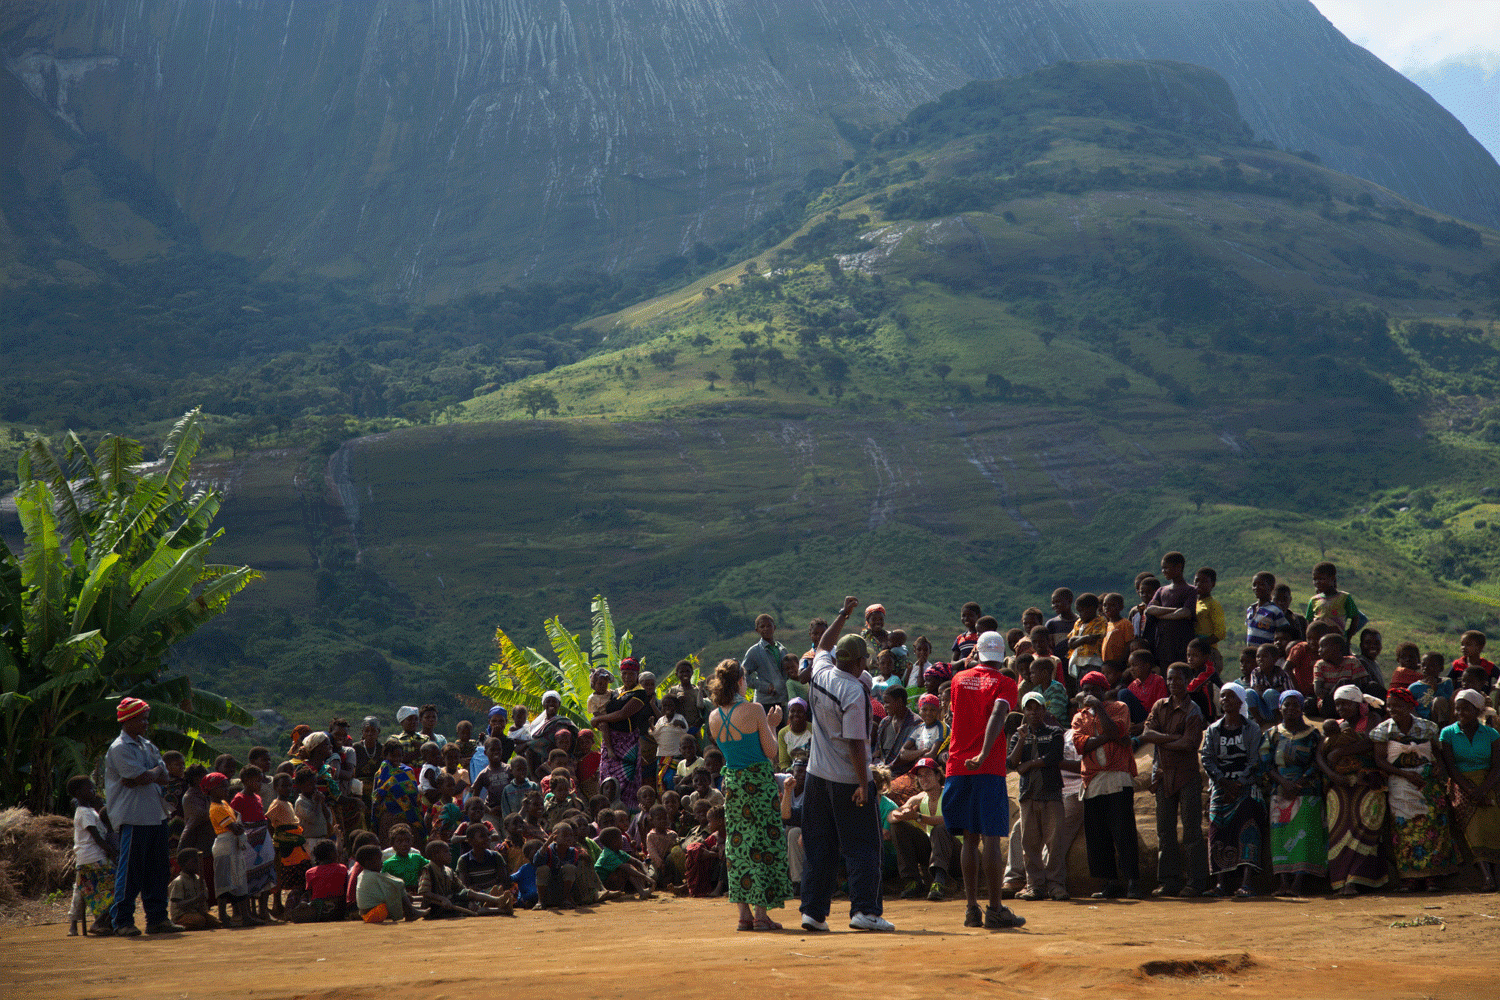 Majka Burhardt '98 and Geraldo Palalane present the findings of Legado’s 2014 vertical biodiversity expedition with the Mucunha community on Mount Namuli, Mozambique. Photo by James Q Martin for Legado.